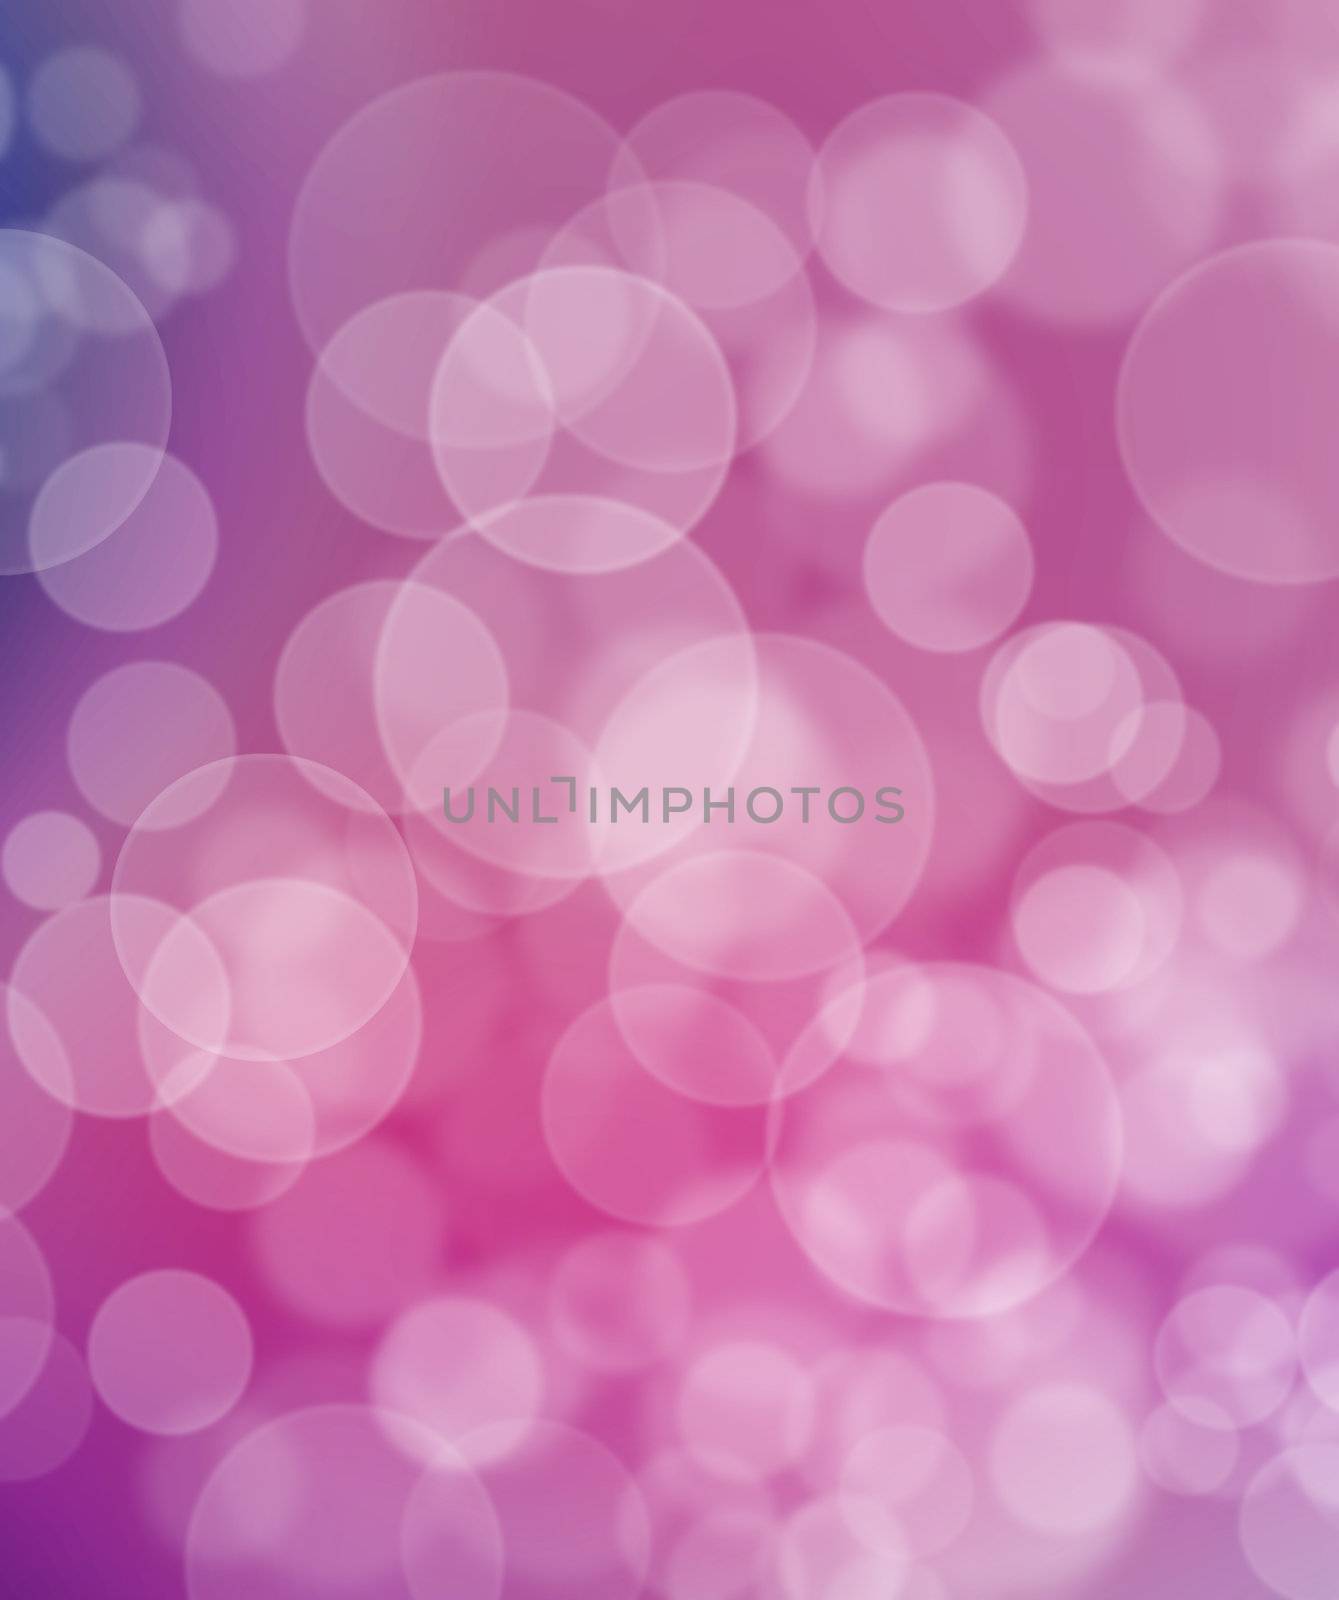 Abstract background of circles in different shades of pink